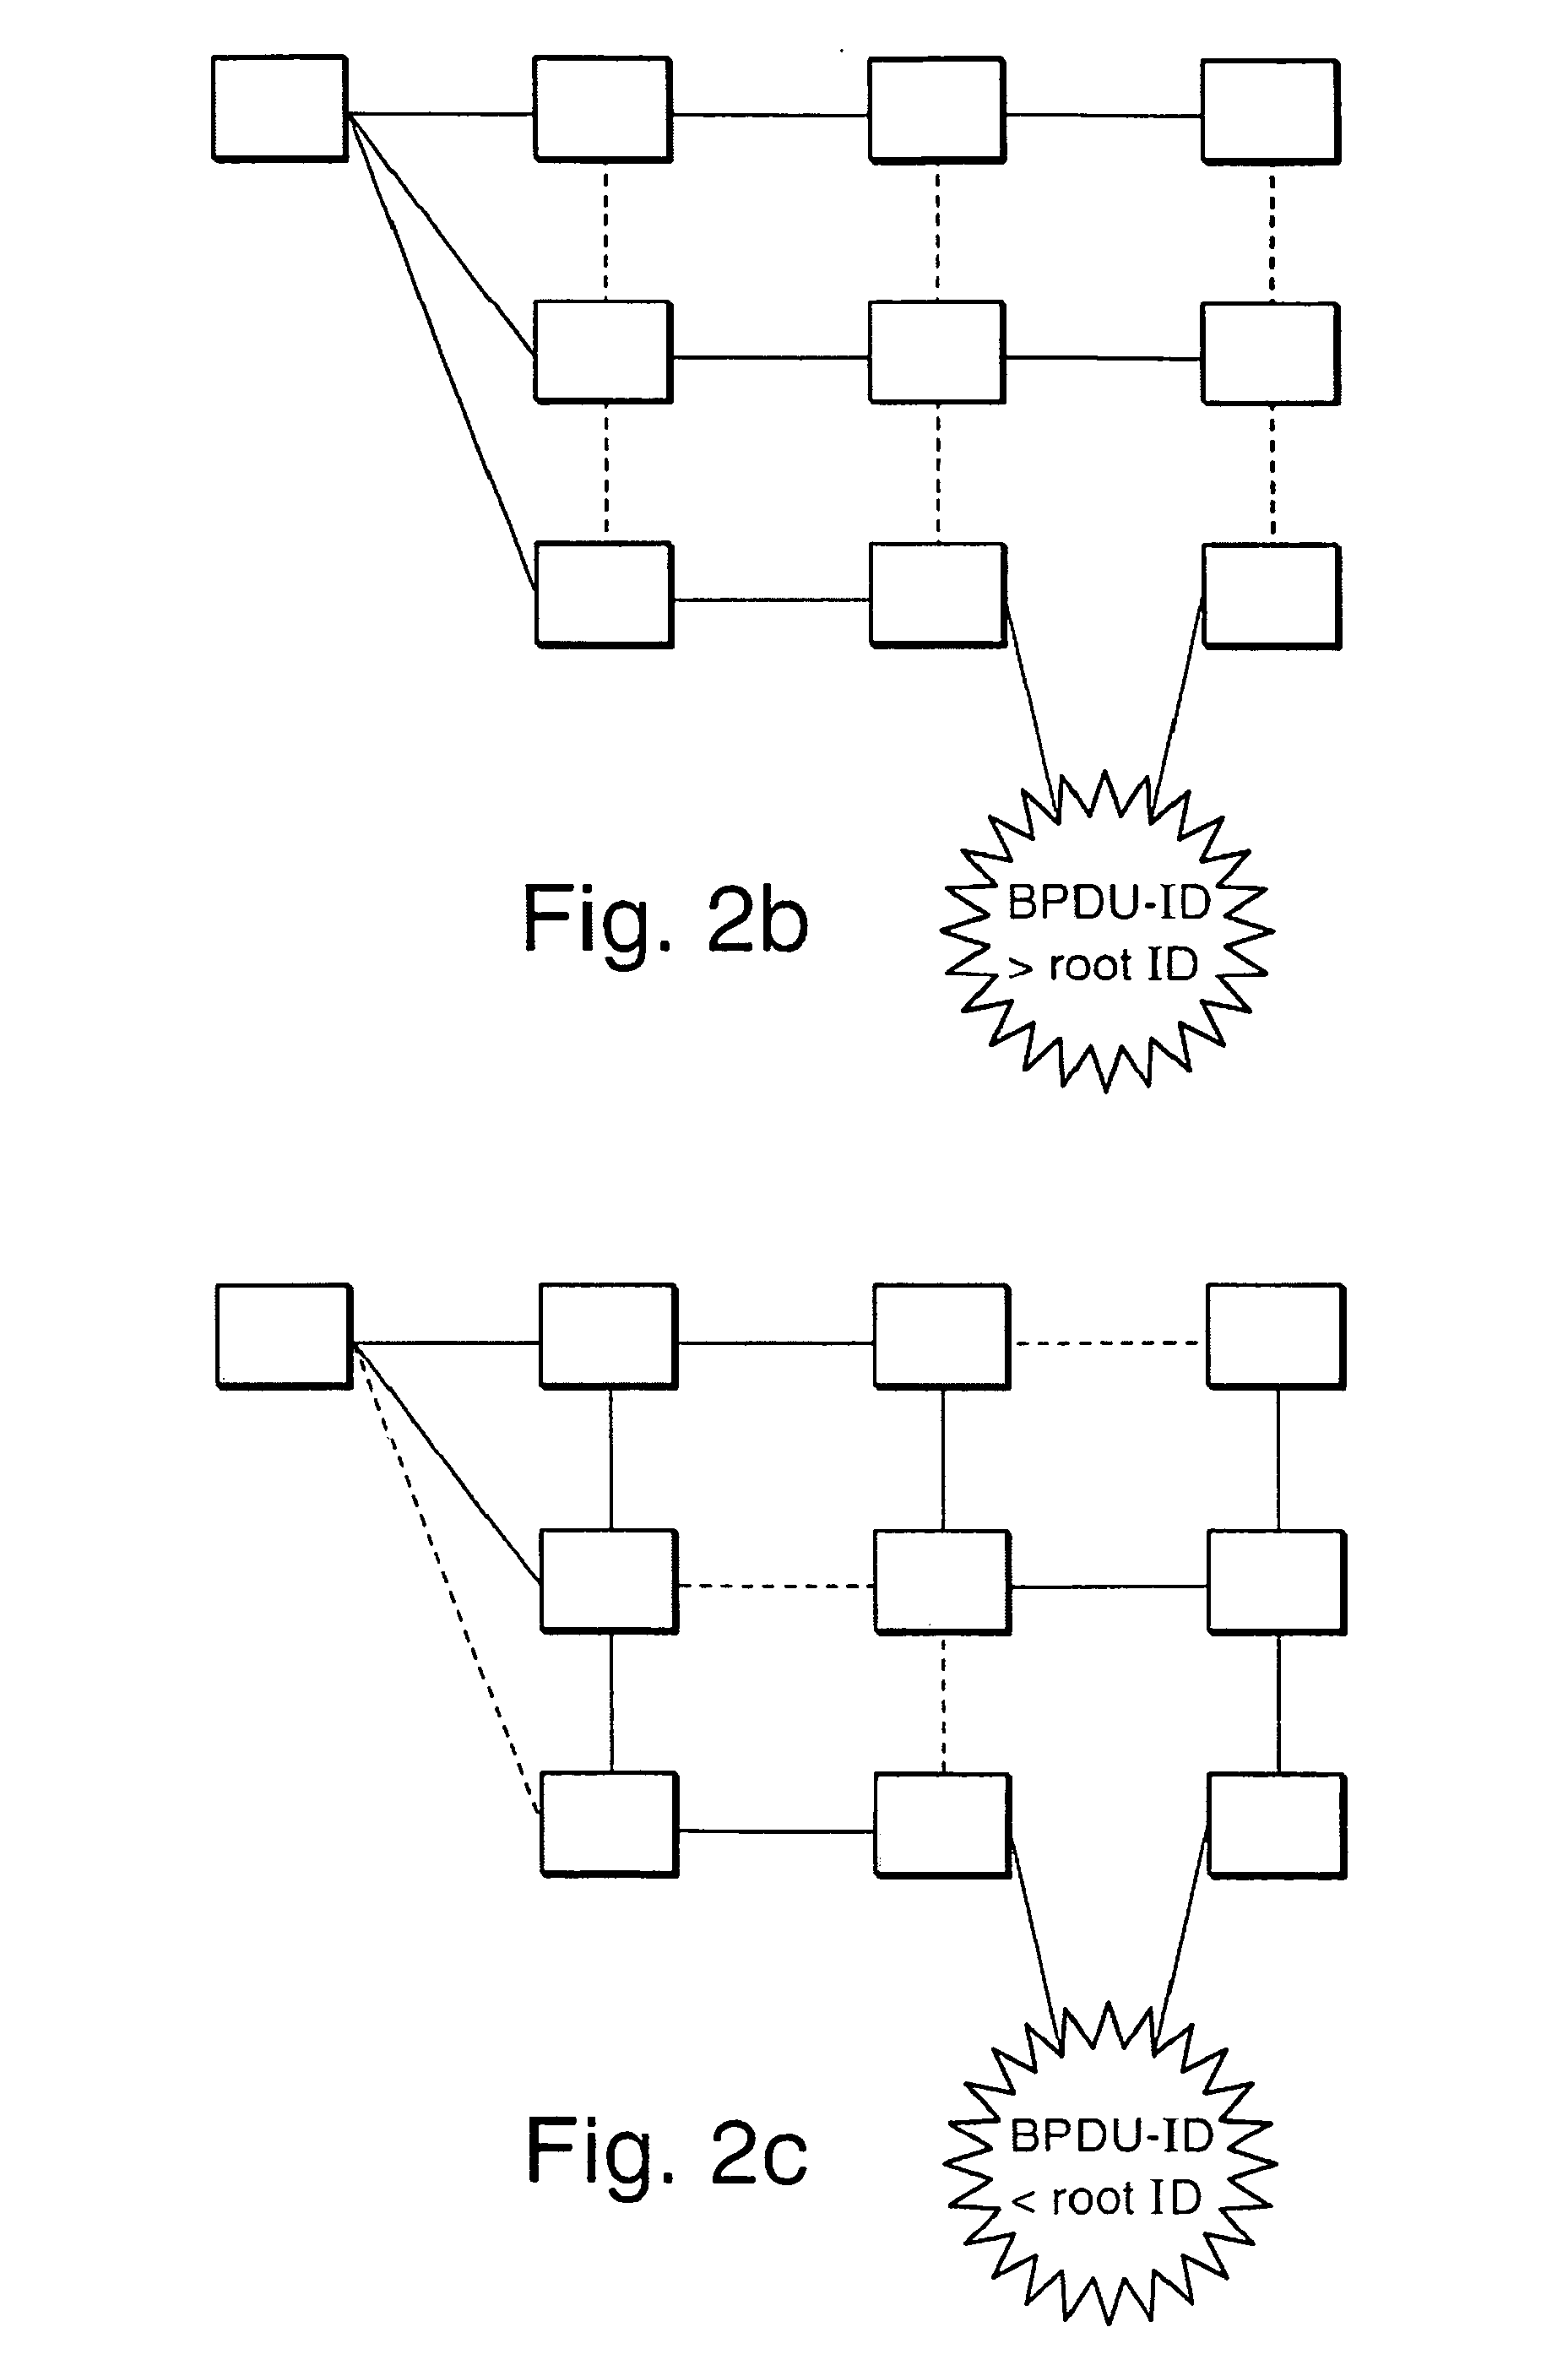 Method for protecting a network configuration set up by a spanning tree protocol